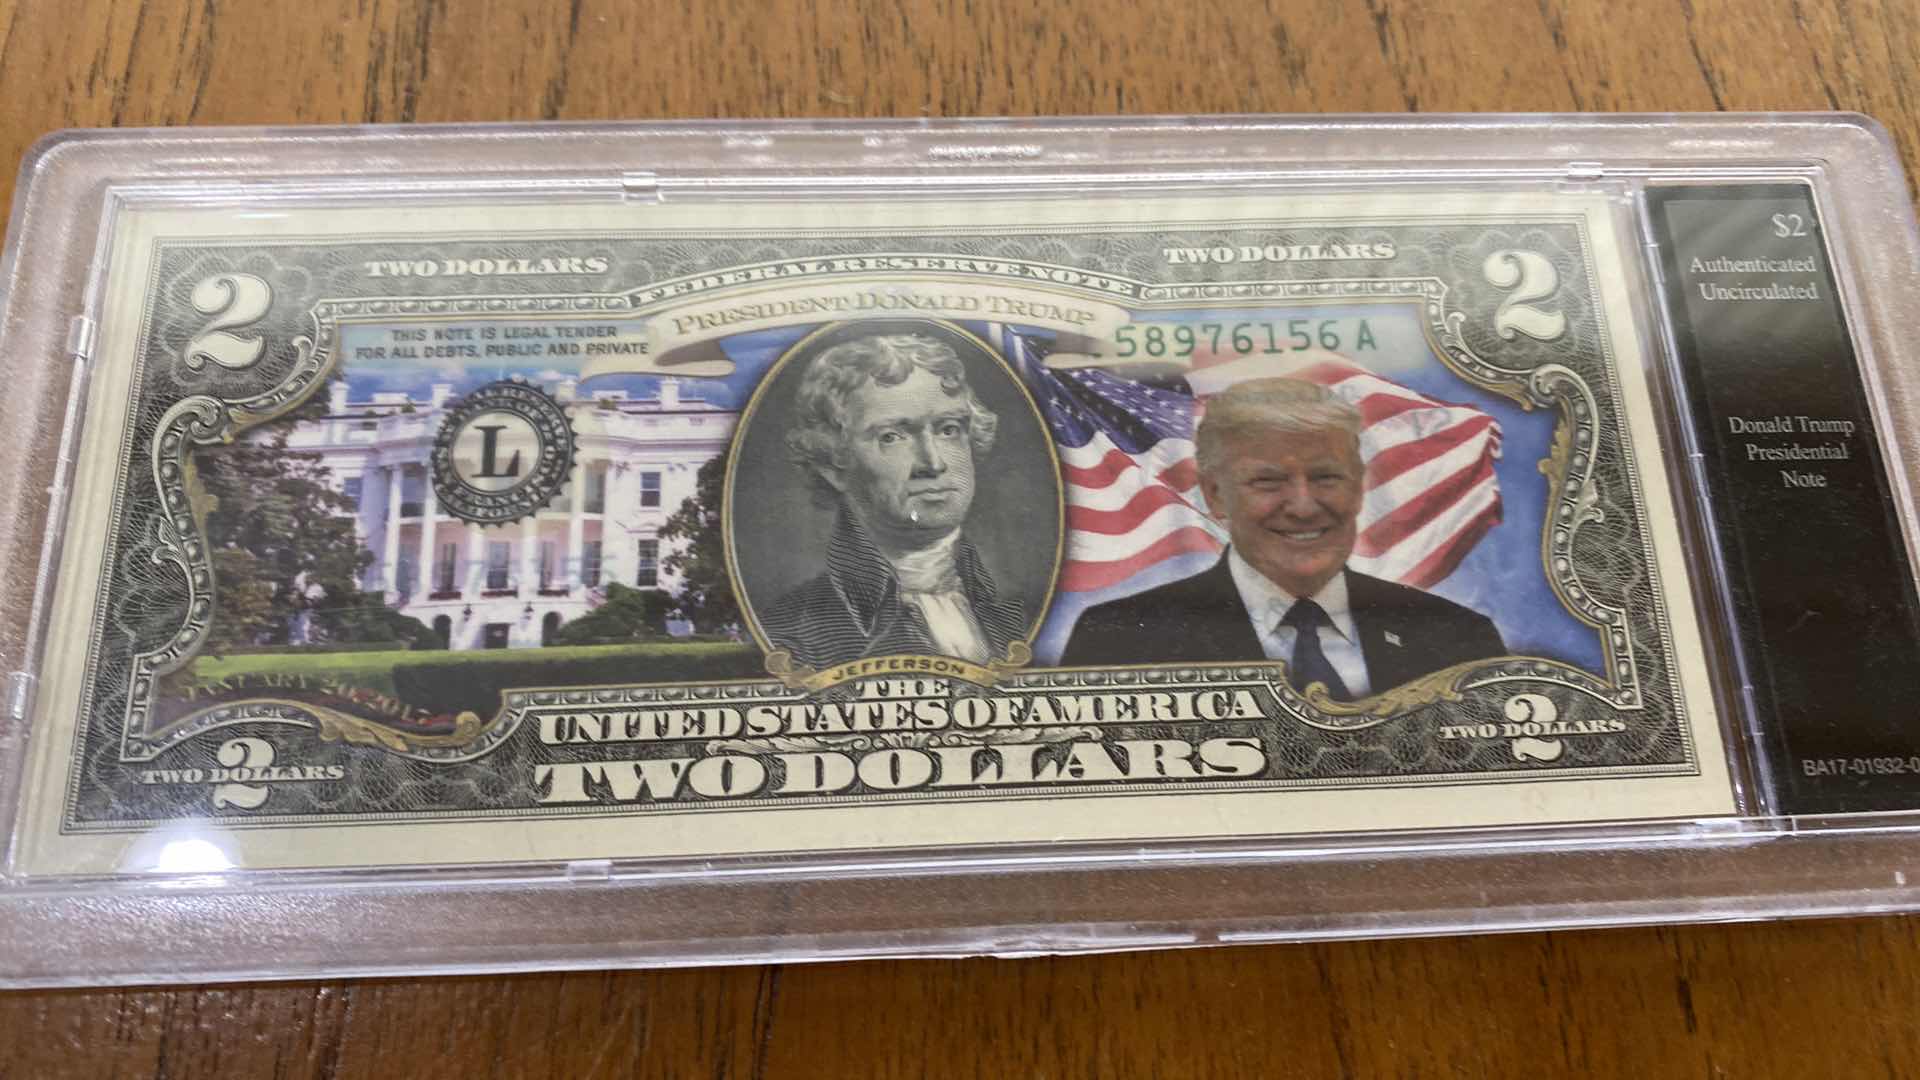 Photo 2 of UNCIRCULATED PRESIDENT TRUMP $2. NOTE AND PRESIDENTIAL LEADERSHIP LIBERTY DOLLAR